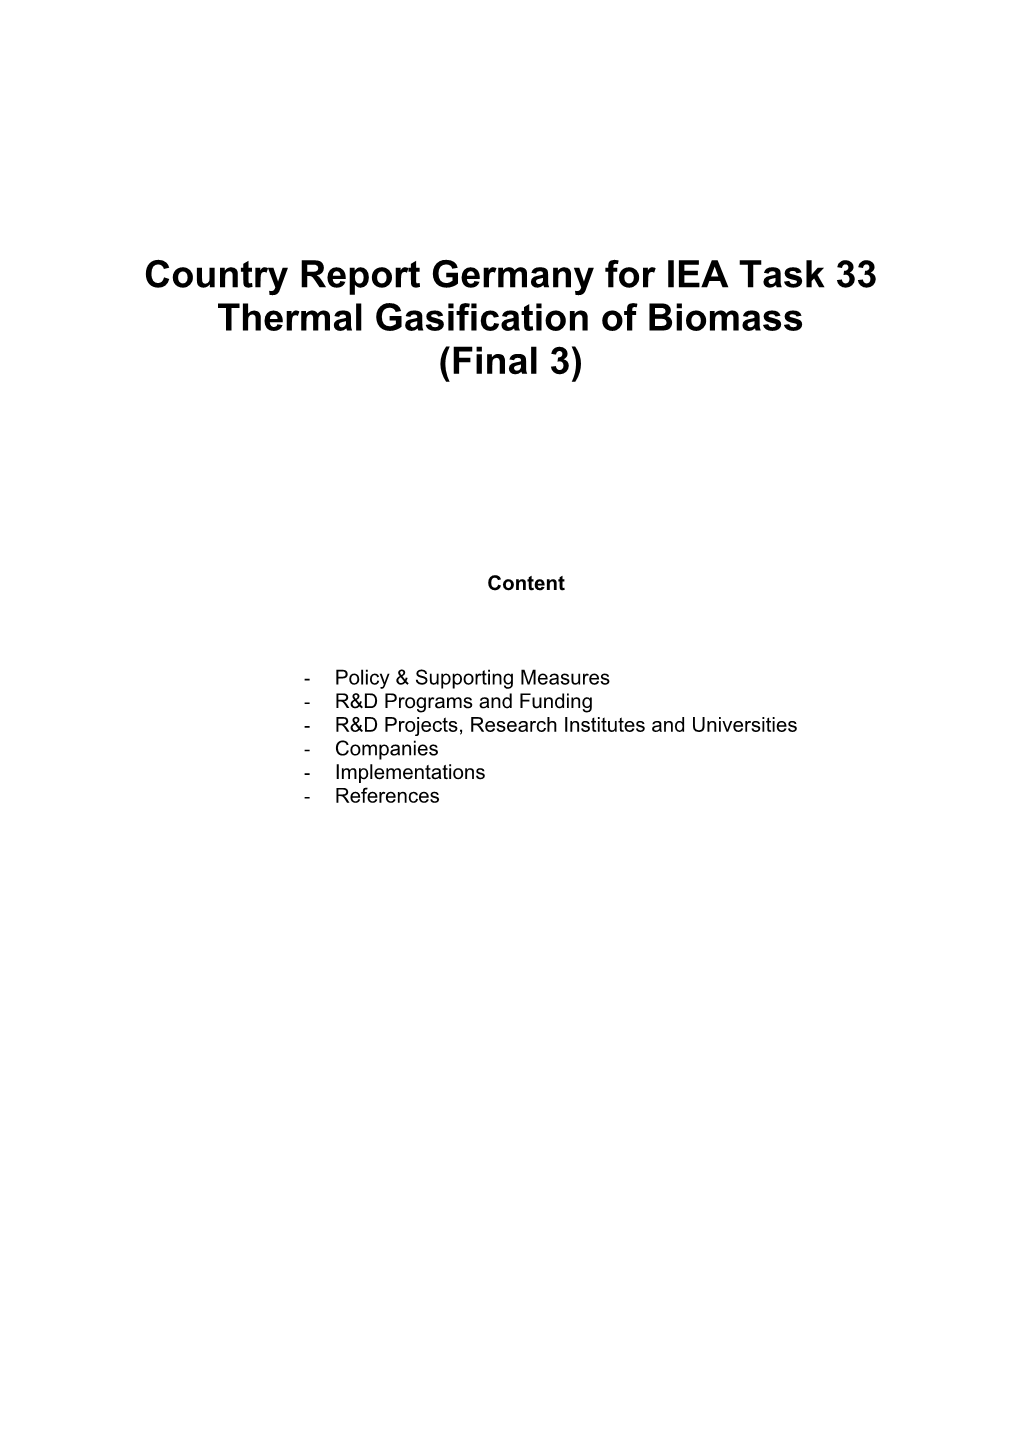 Country Report Germany for IEA Task 33 Thermal Gasification of Biomass (Final 3)